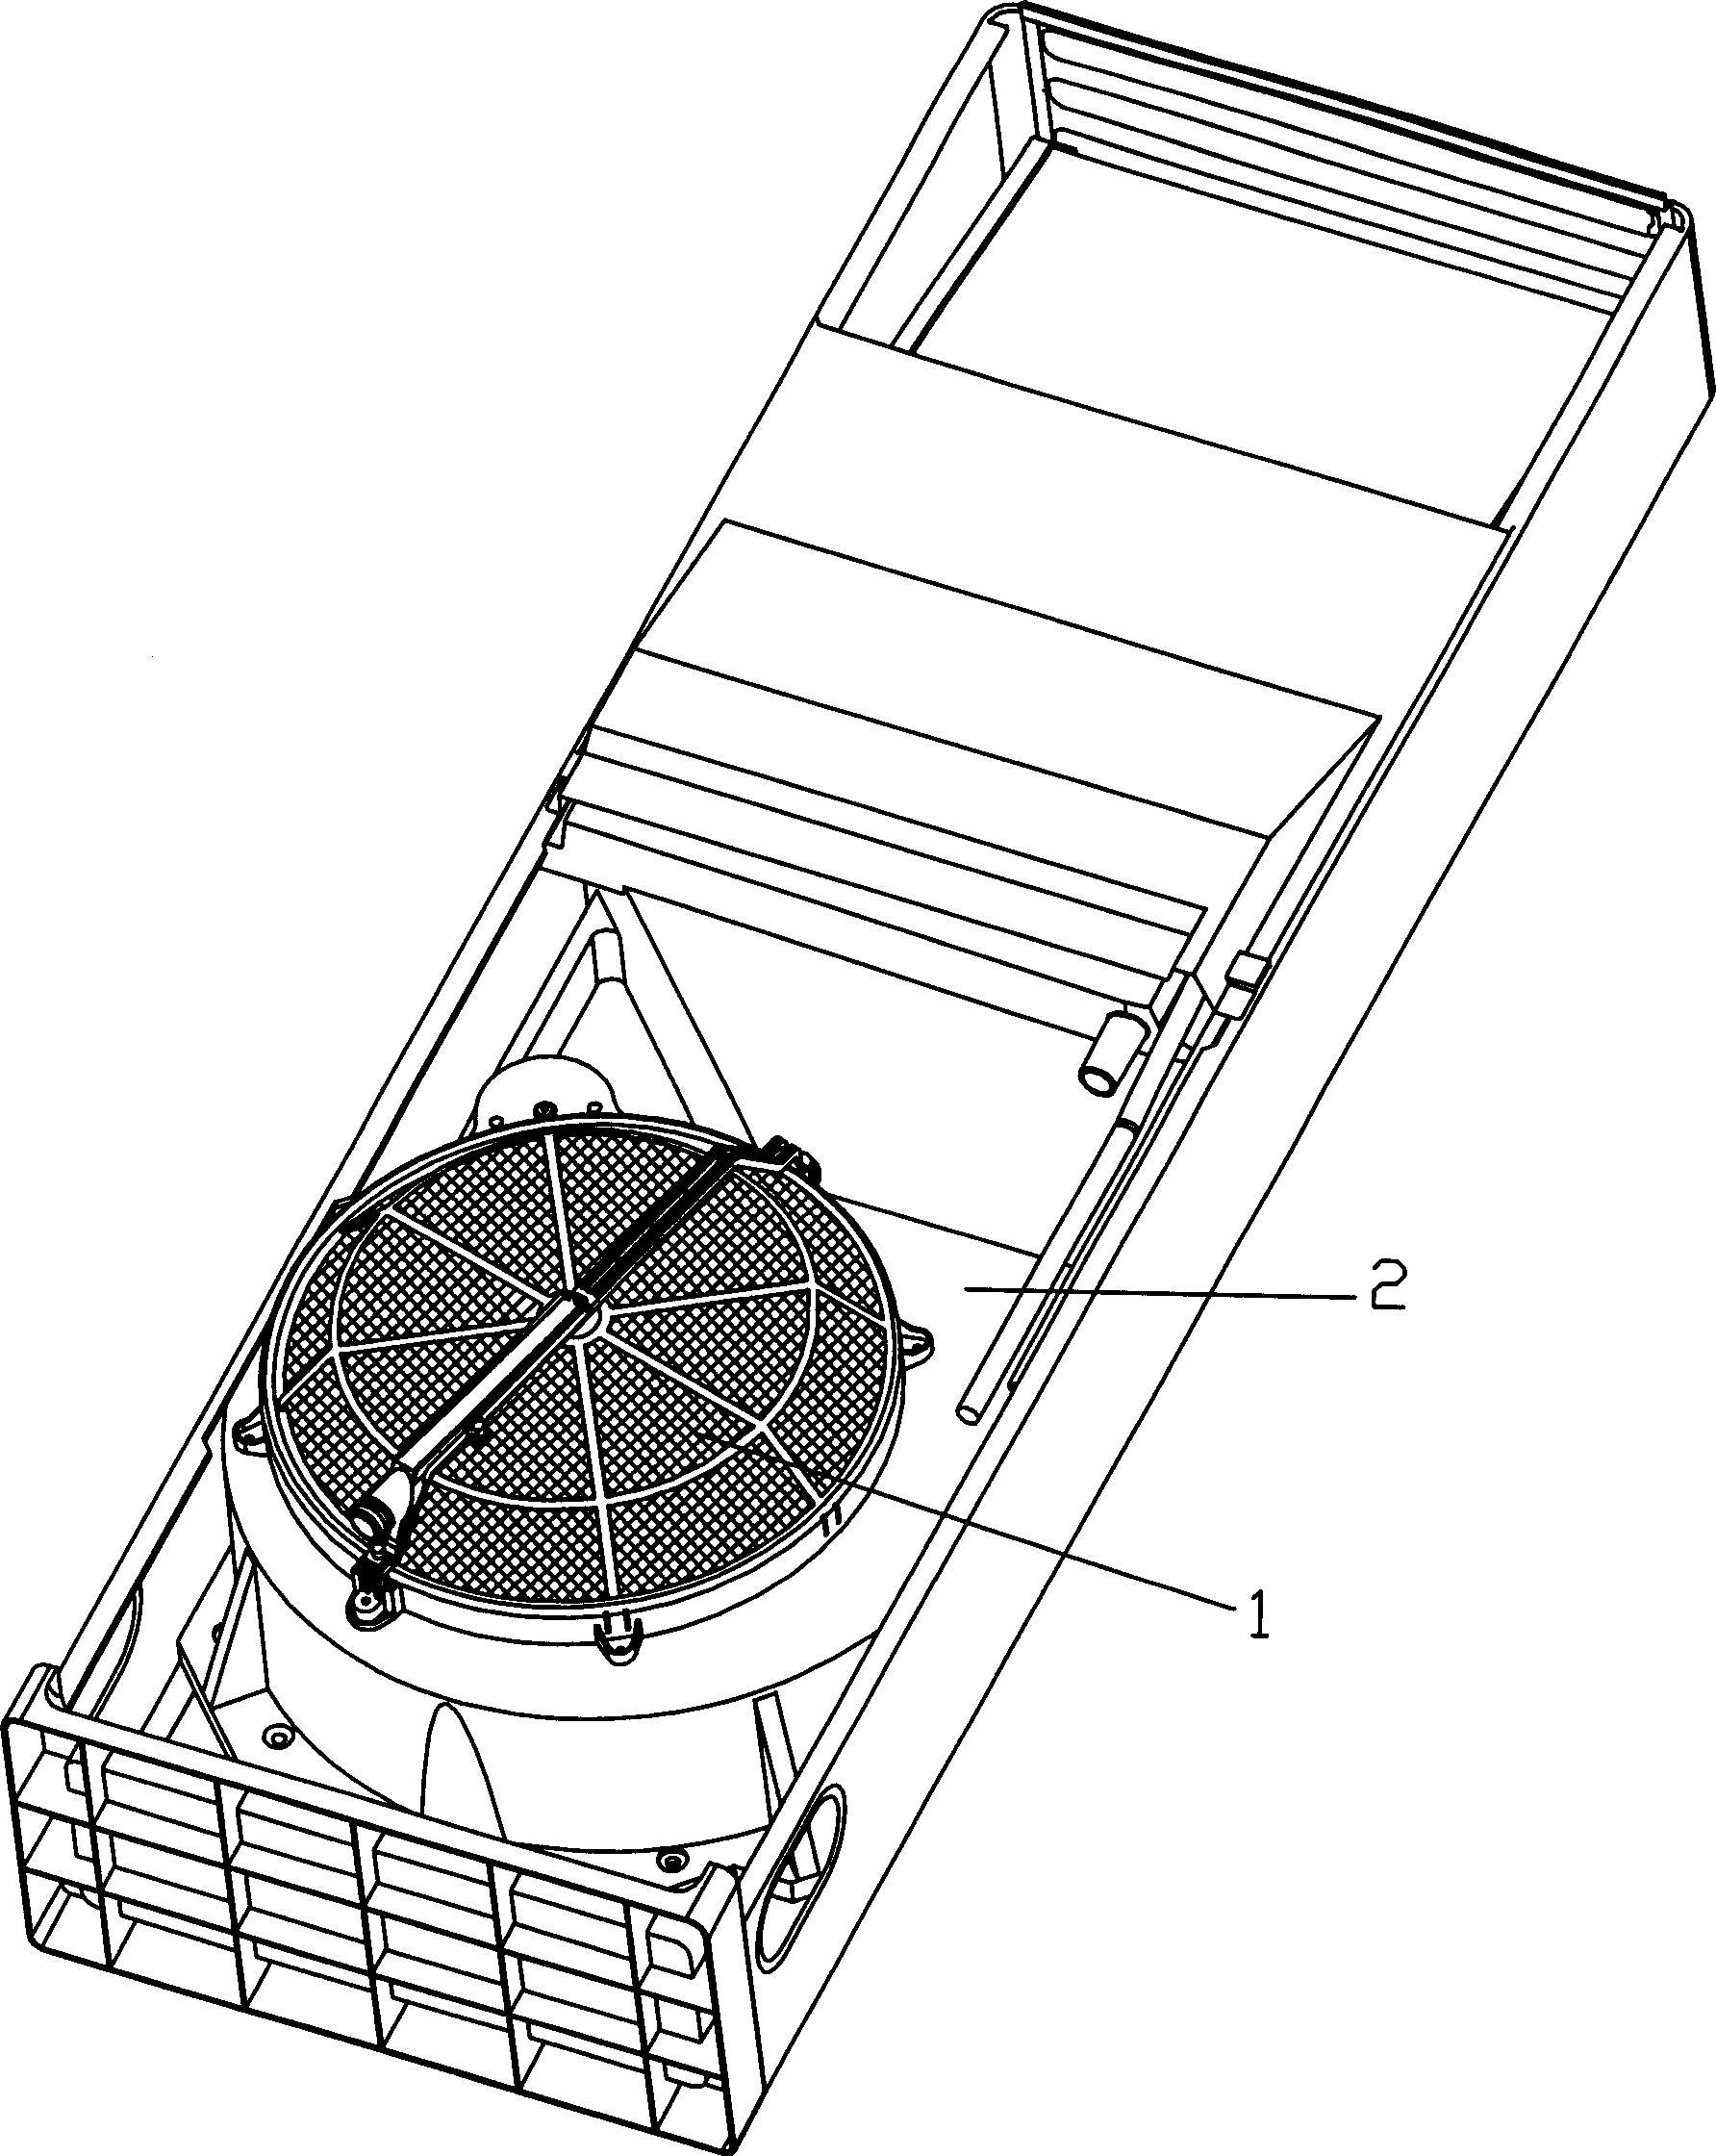 Self-purging unit for filter screen of air conditionner